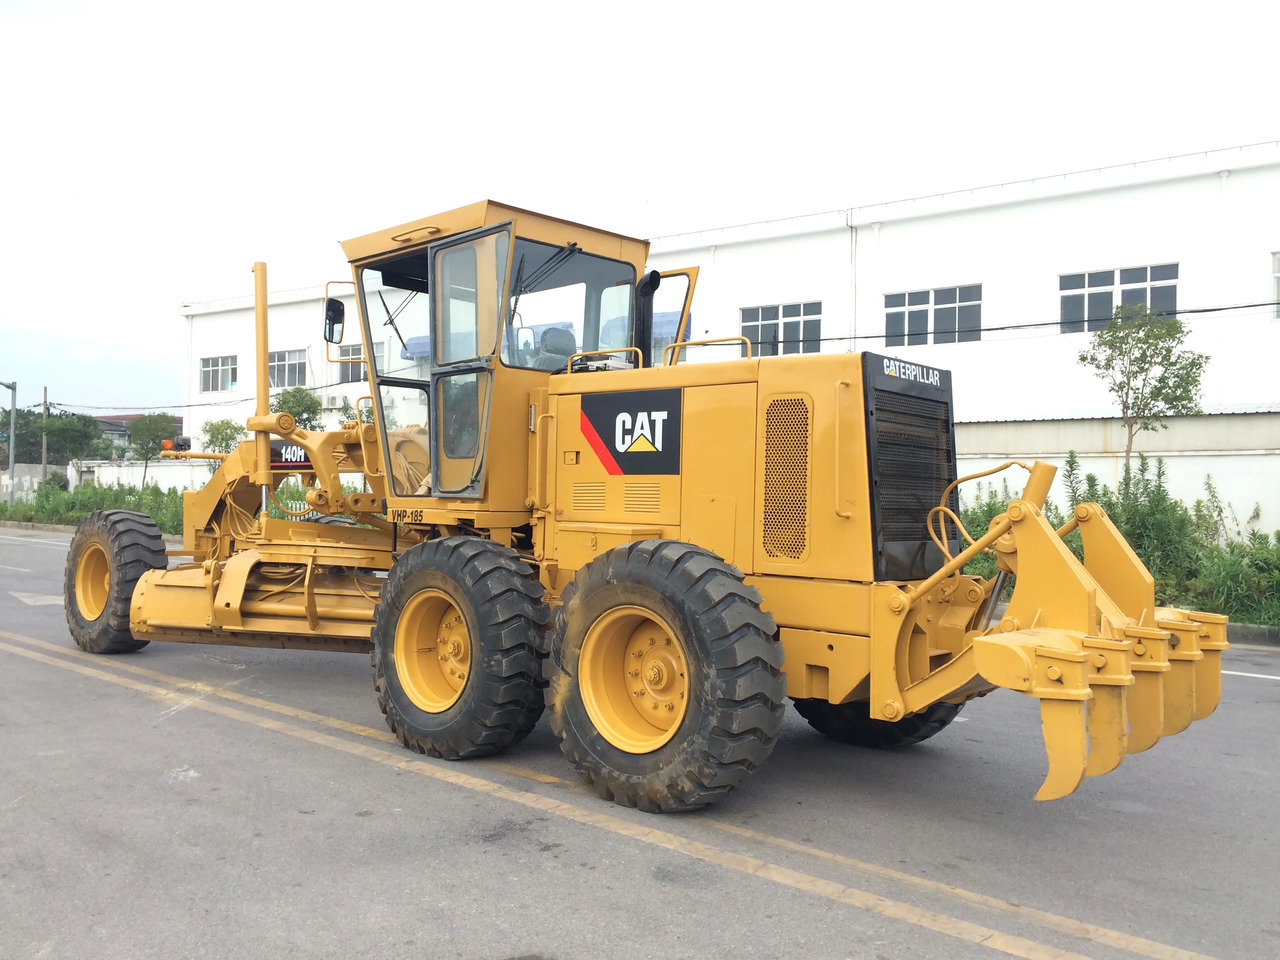 Грейдер Hot sale Used Cat 140H motor grader with good condition,USED heavy equipment used motor grader CAT 140H grader in China: снимка 4